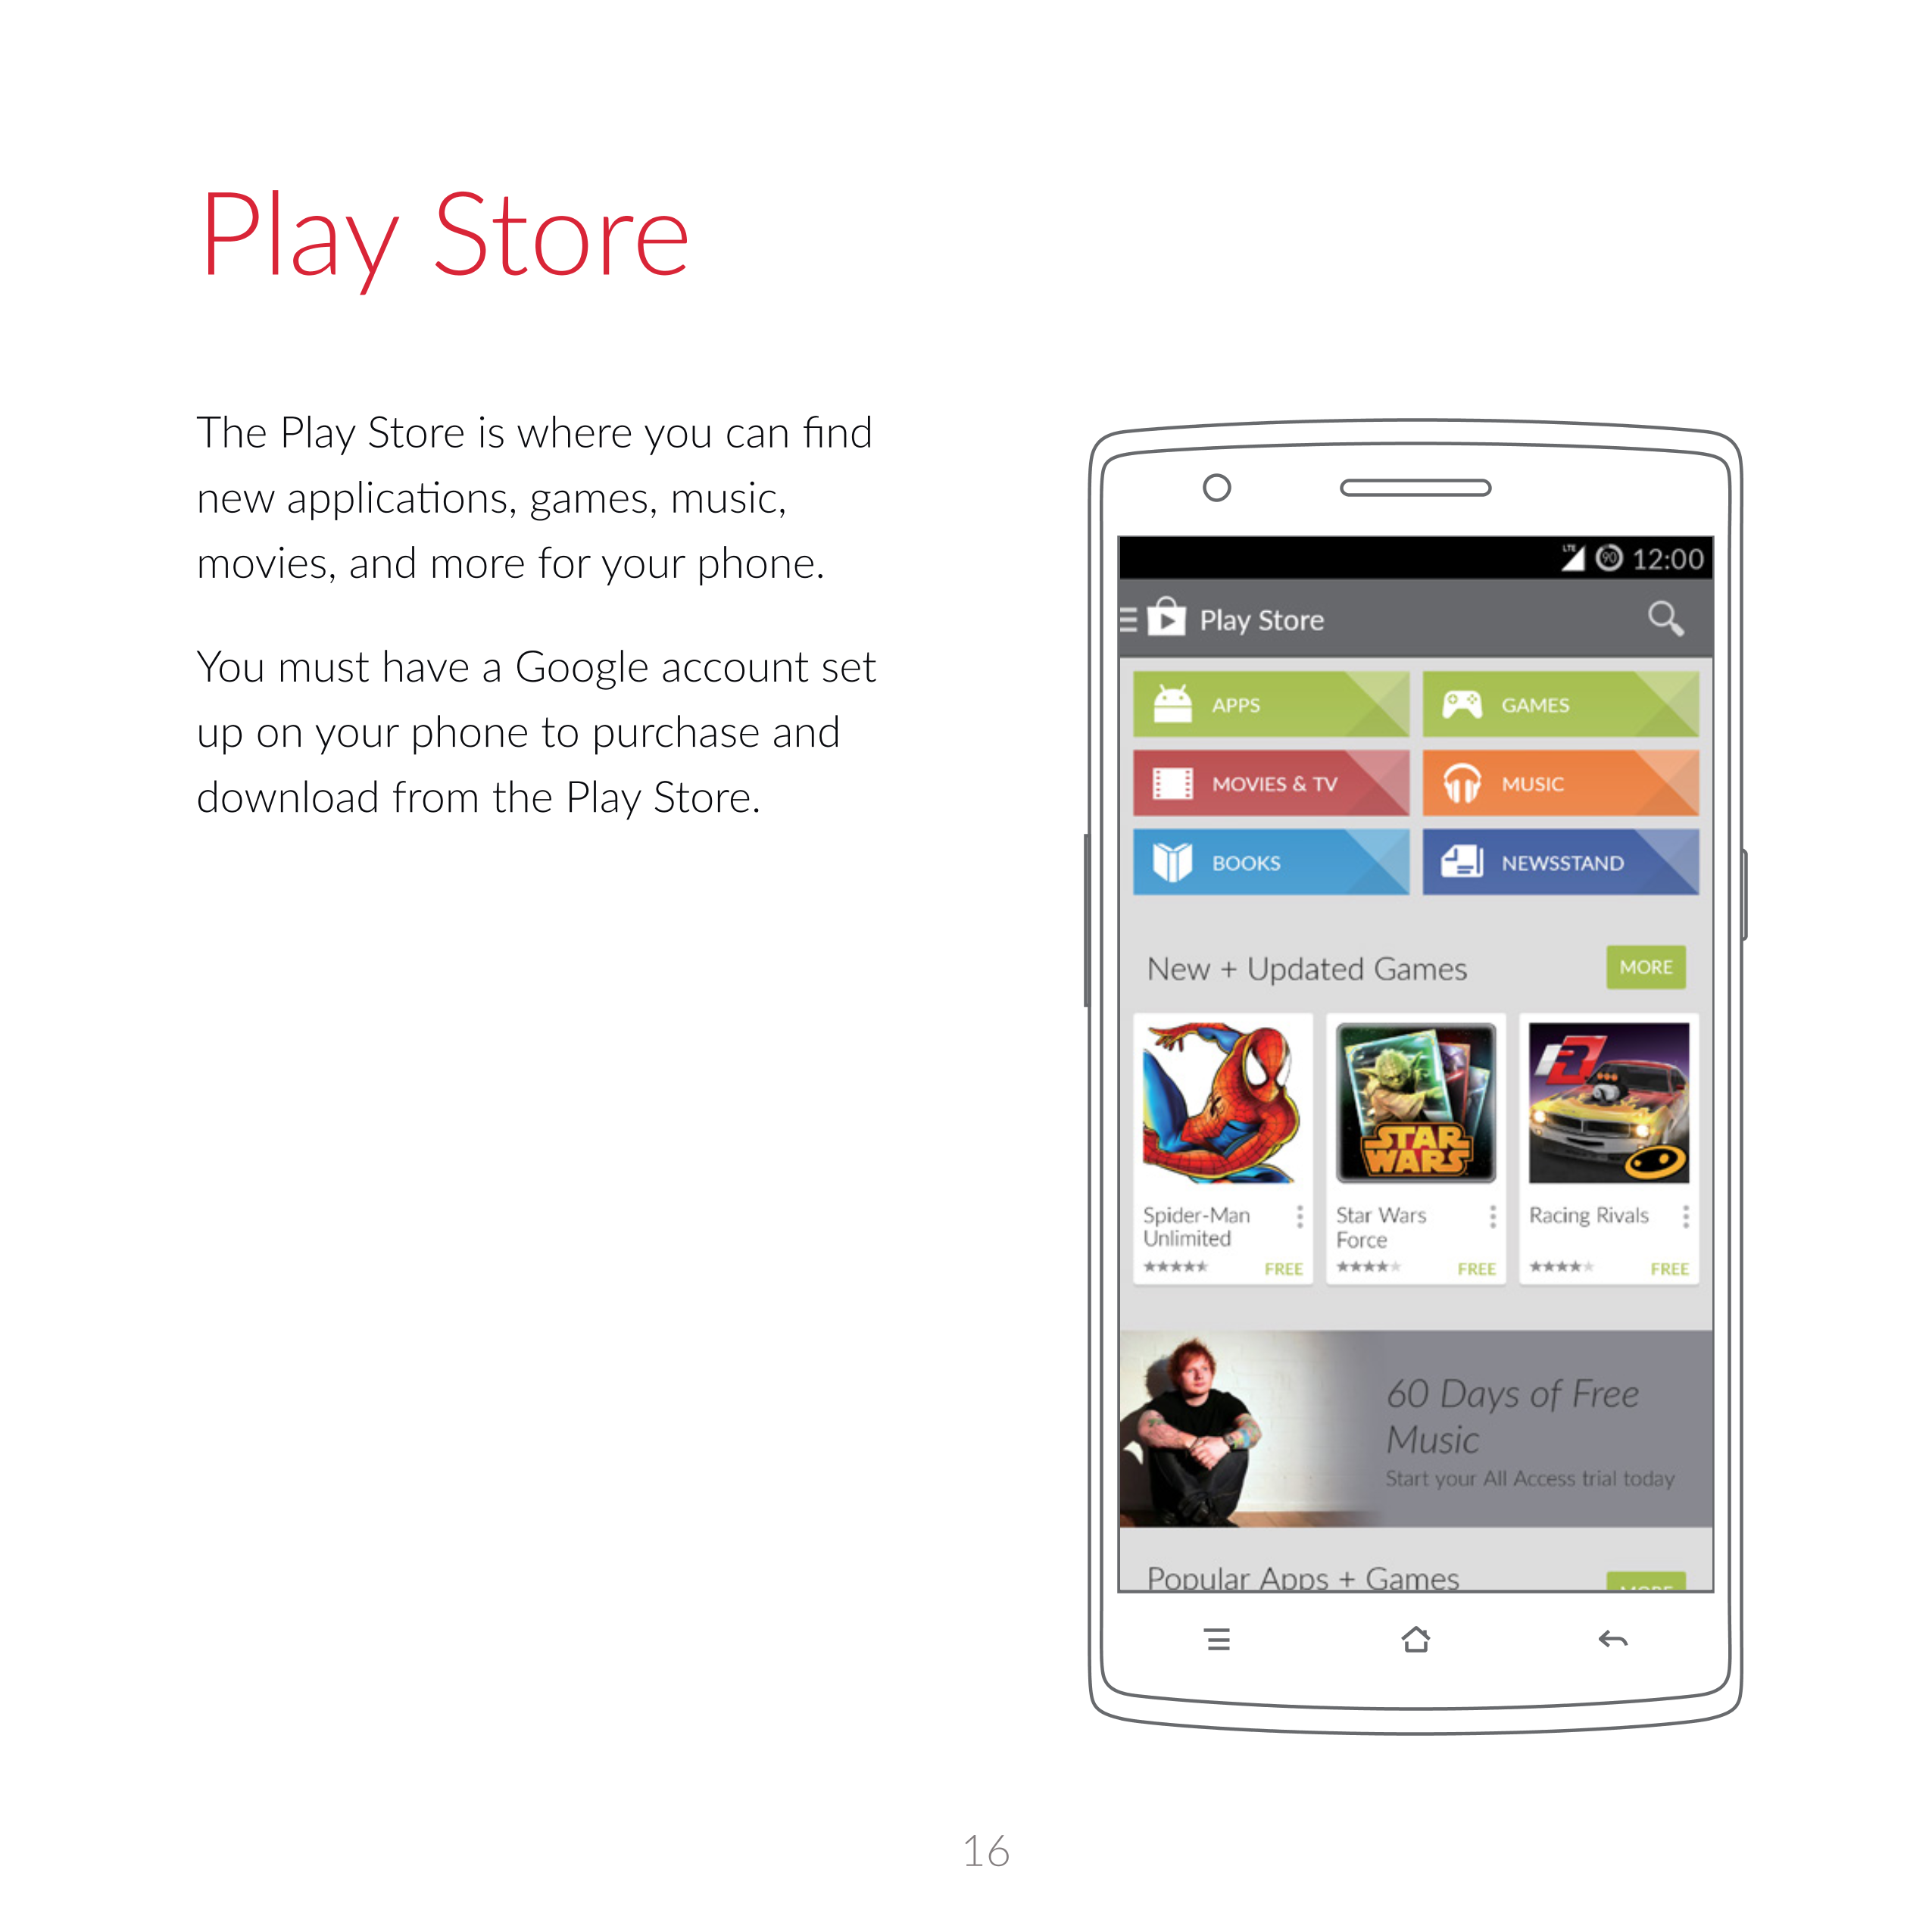 Play  Store
The  Play  Store is  where  you can find 
movies, and more  for  your phone.
You must have a  Google account set 
up